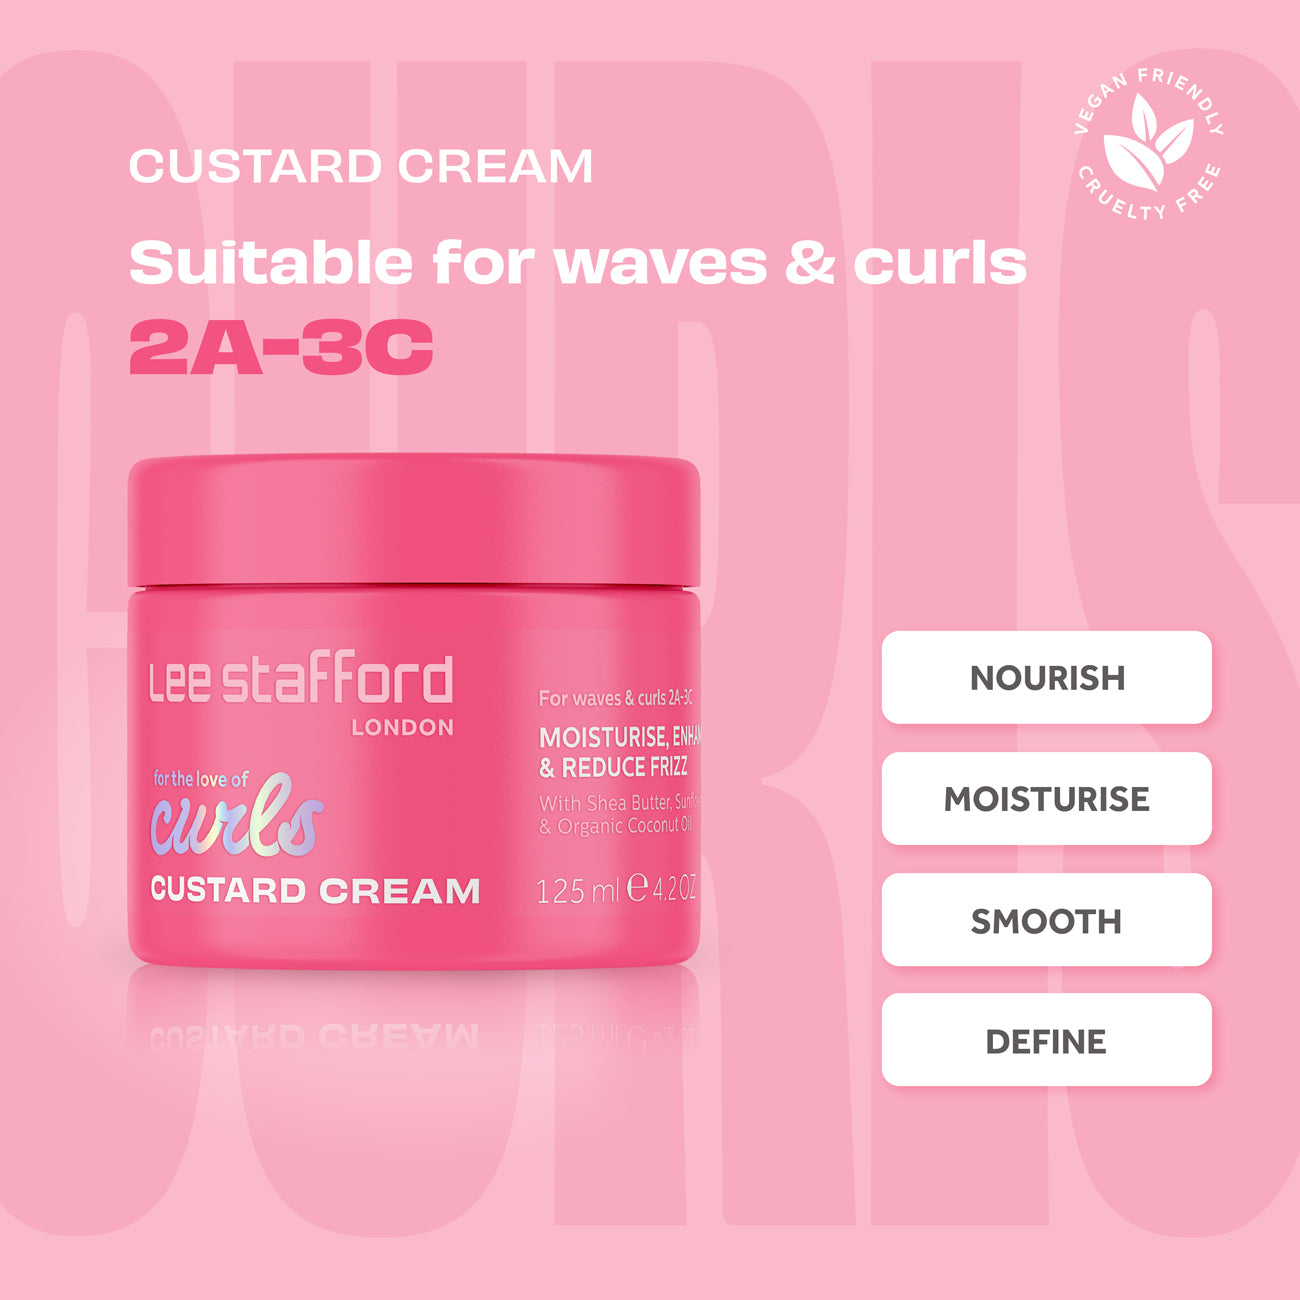 For The Love of Curls : Custard Cream for Waves & Curls